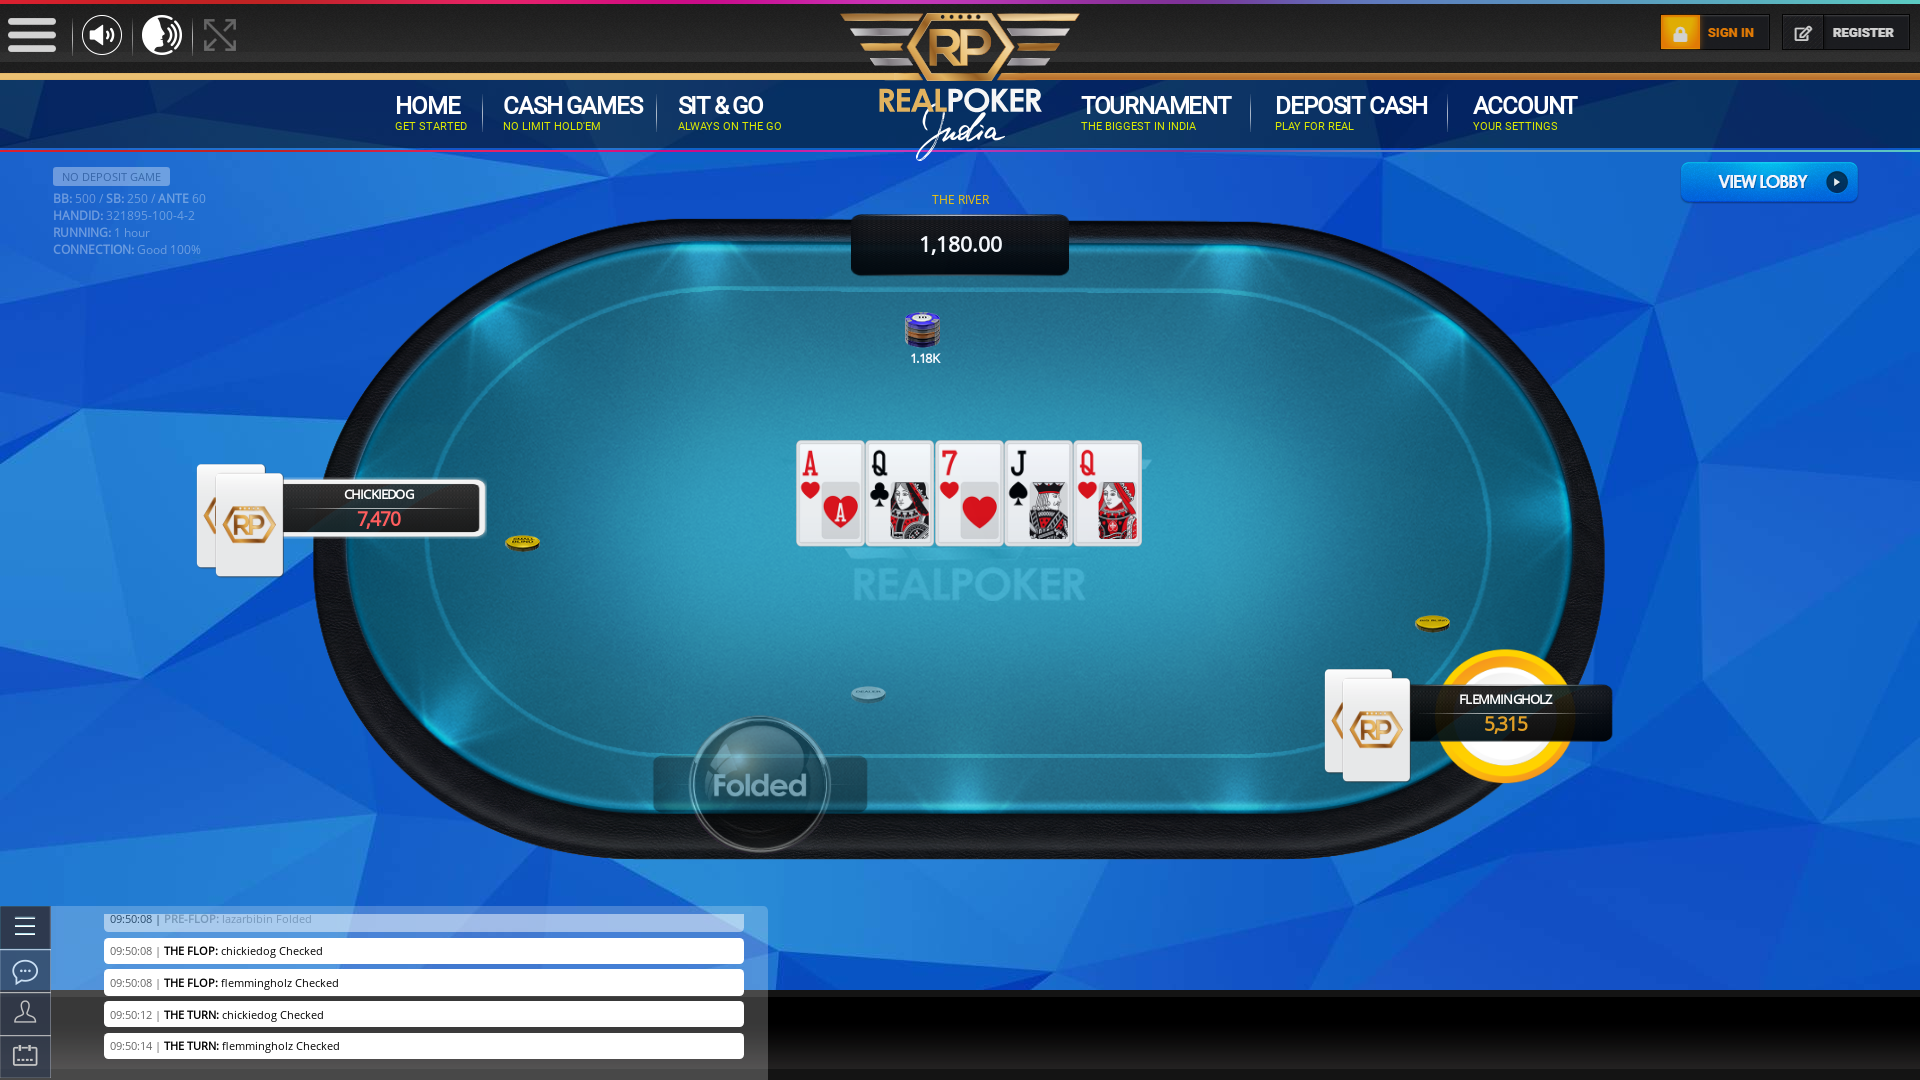 10 player texas holdem table at real poker with the table id 321895